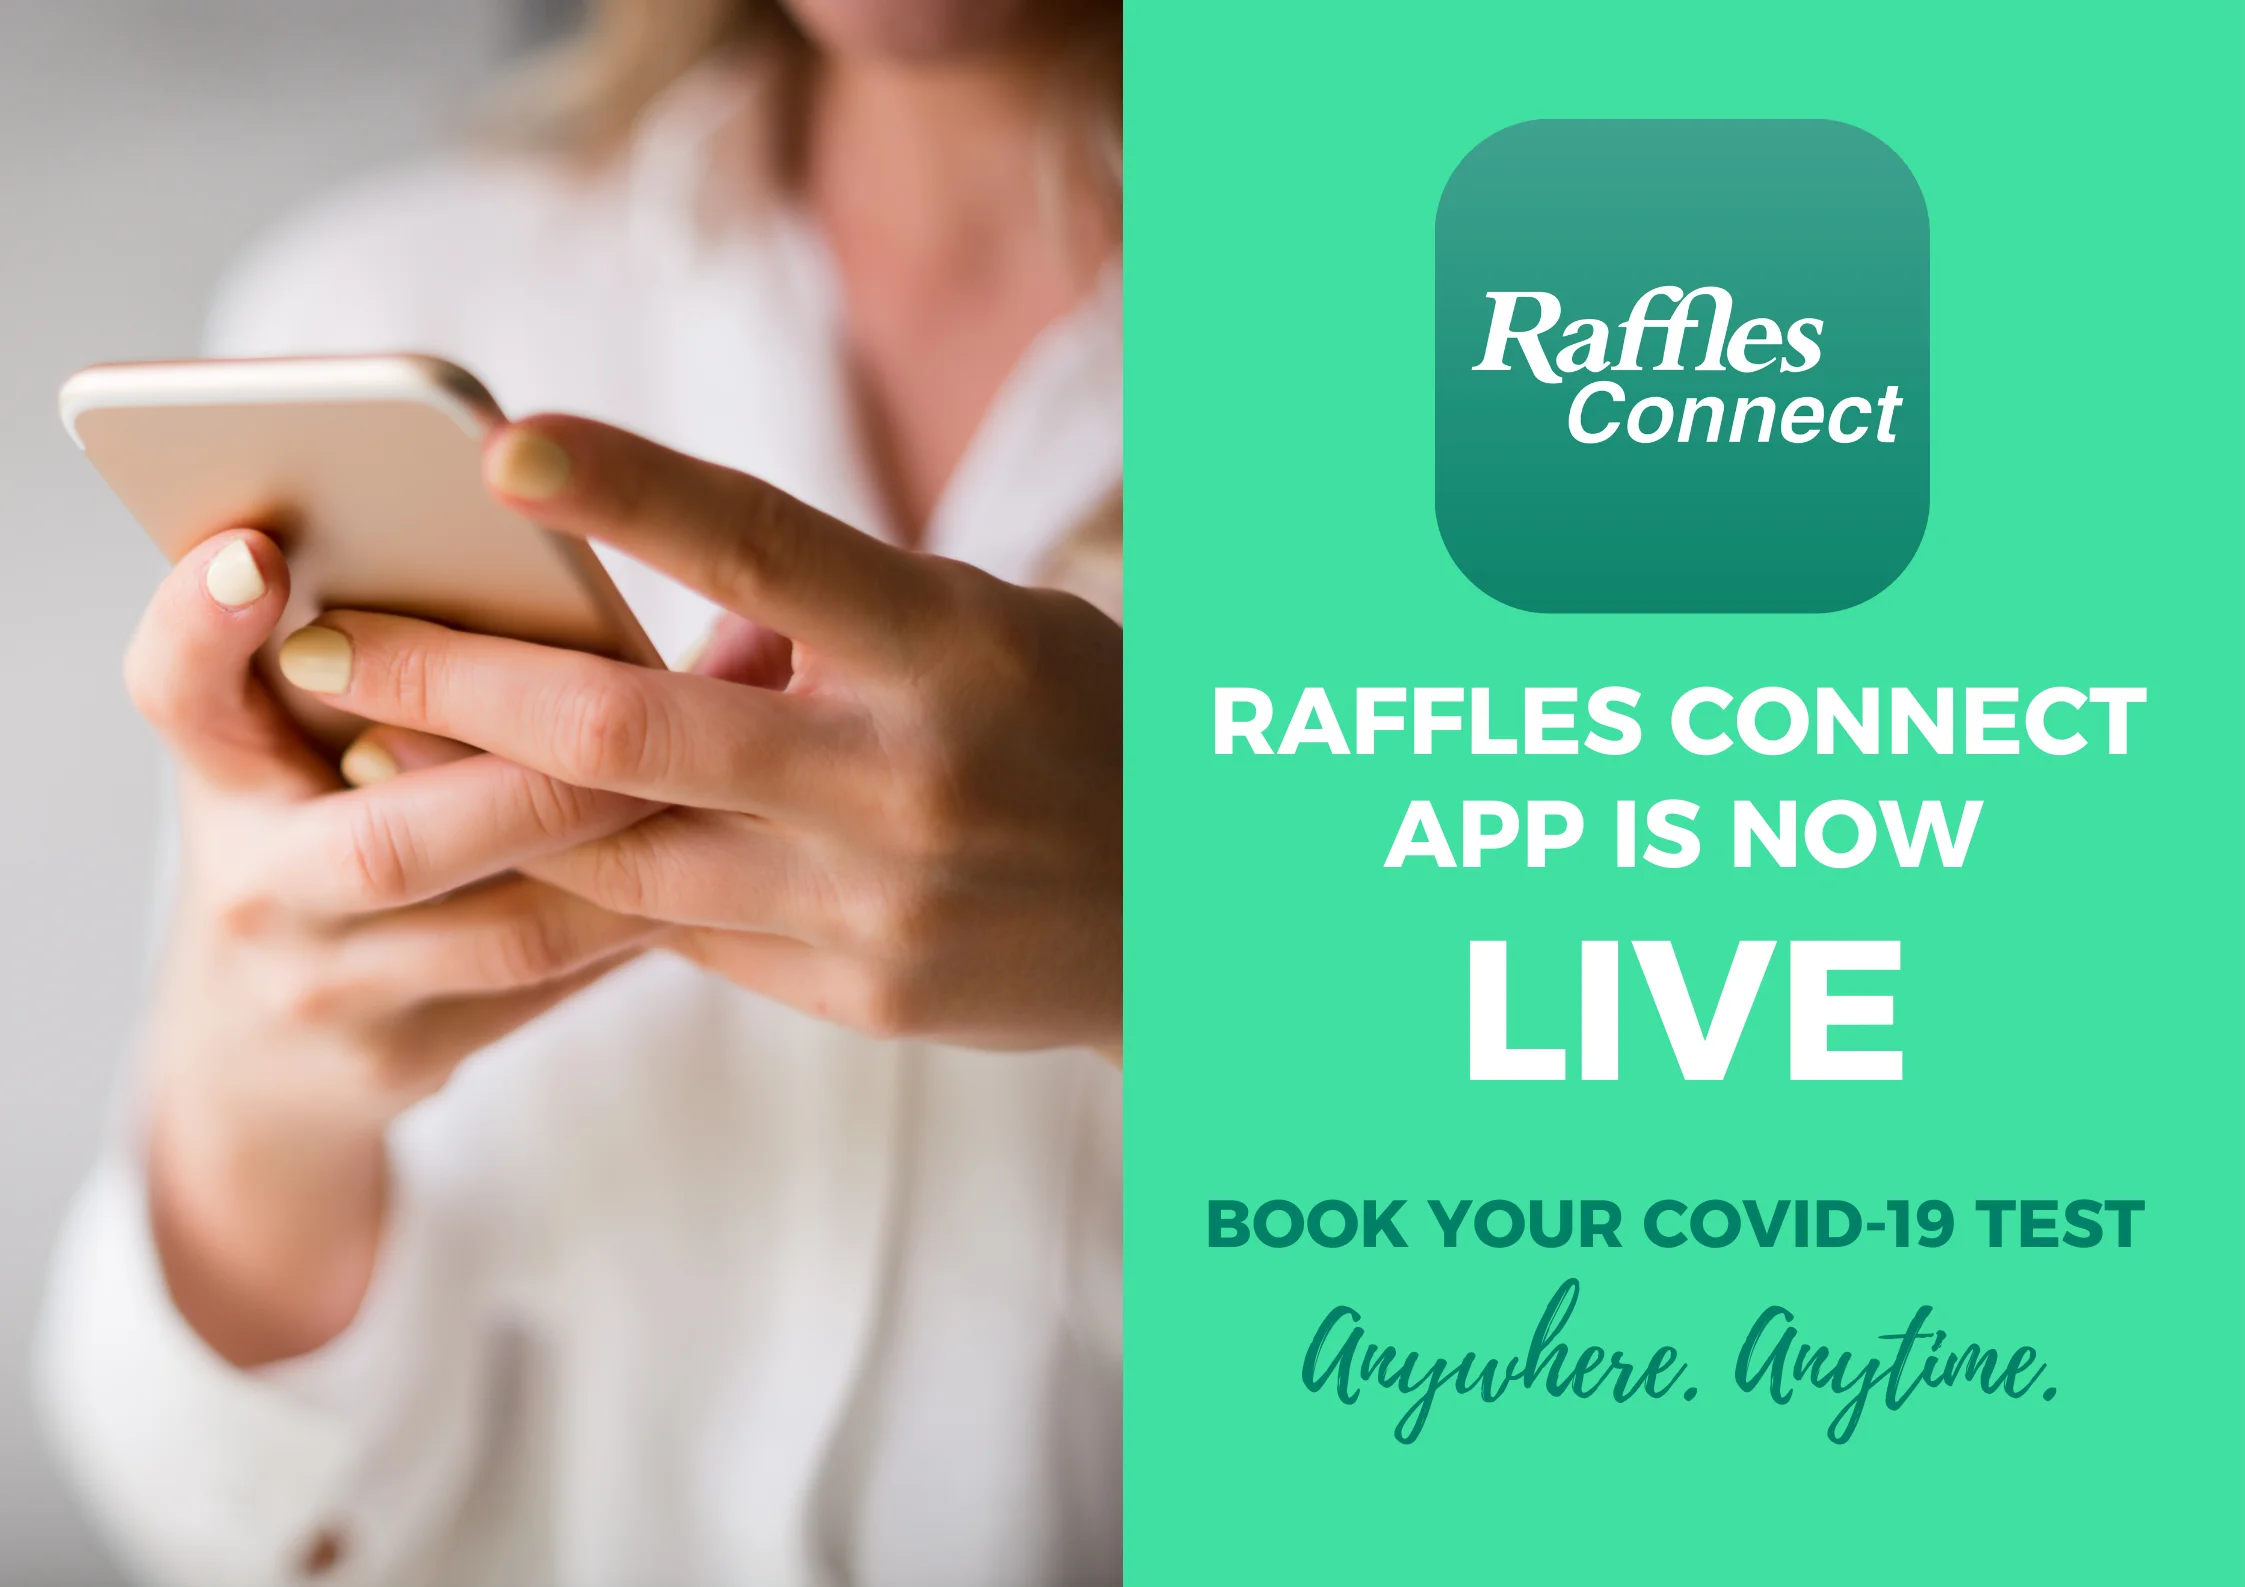 Raffles Connect App Is Now LIVE | Book Your COVID-19 Test Anywhere, Anytime